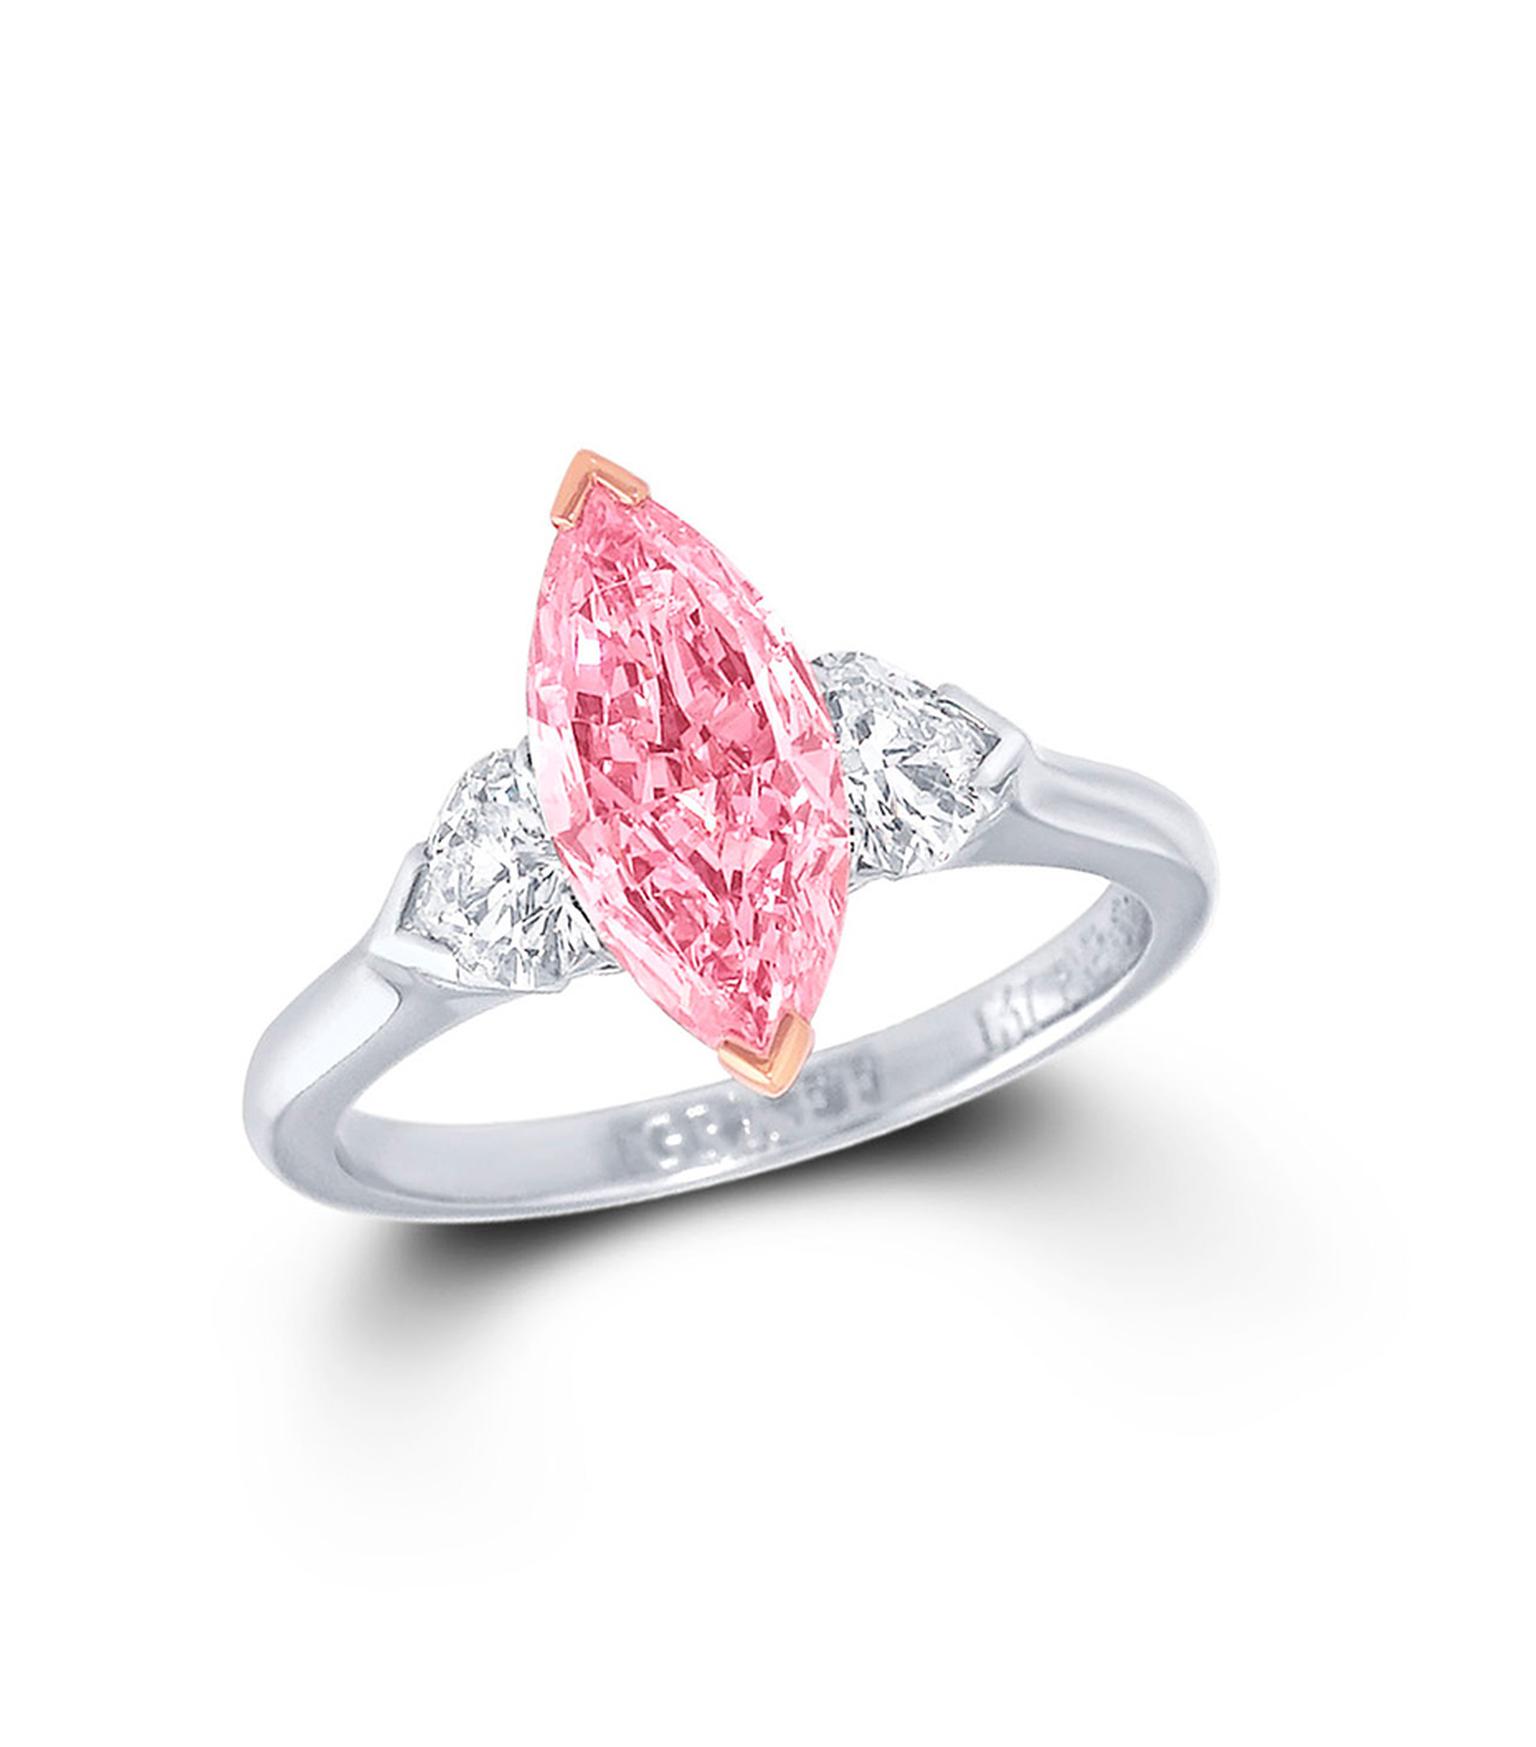 Graff marquise-cut pink centre diamond ring featuring two